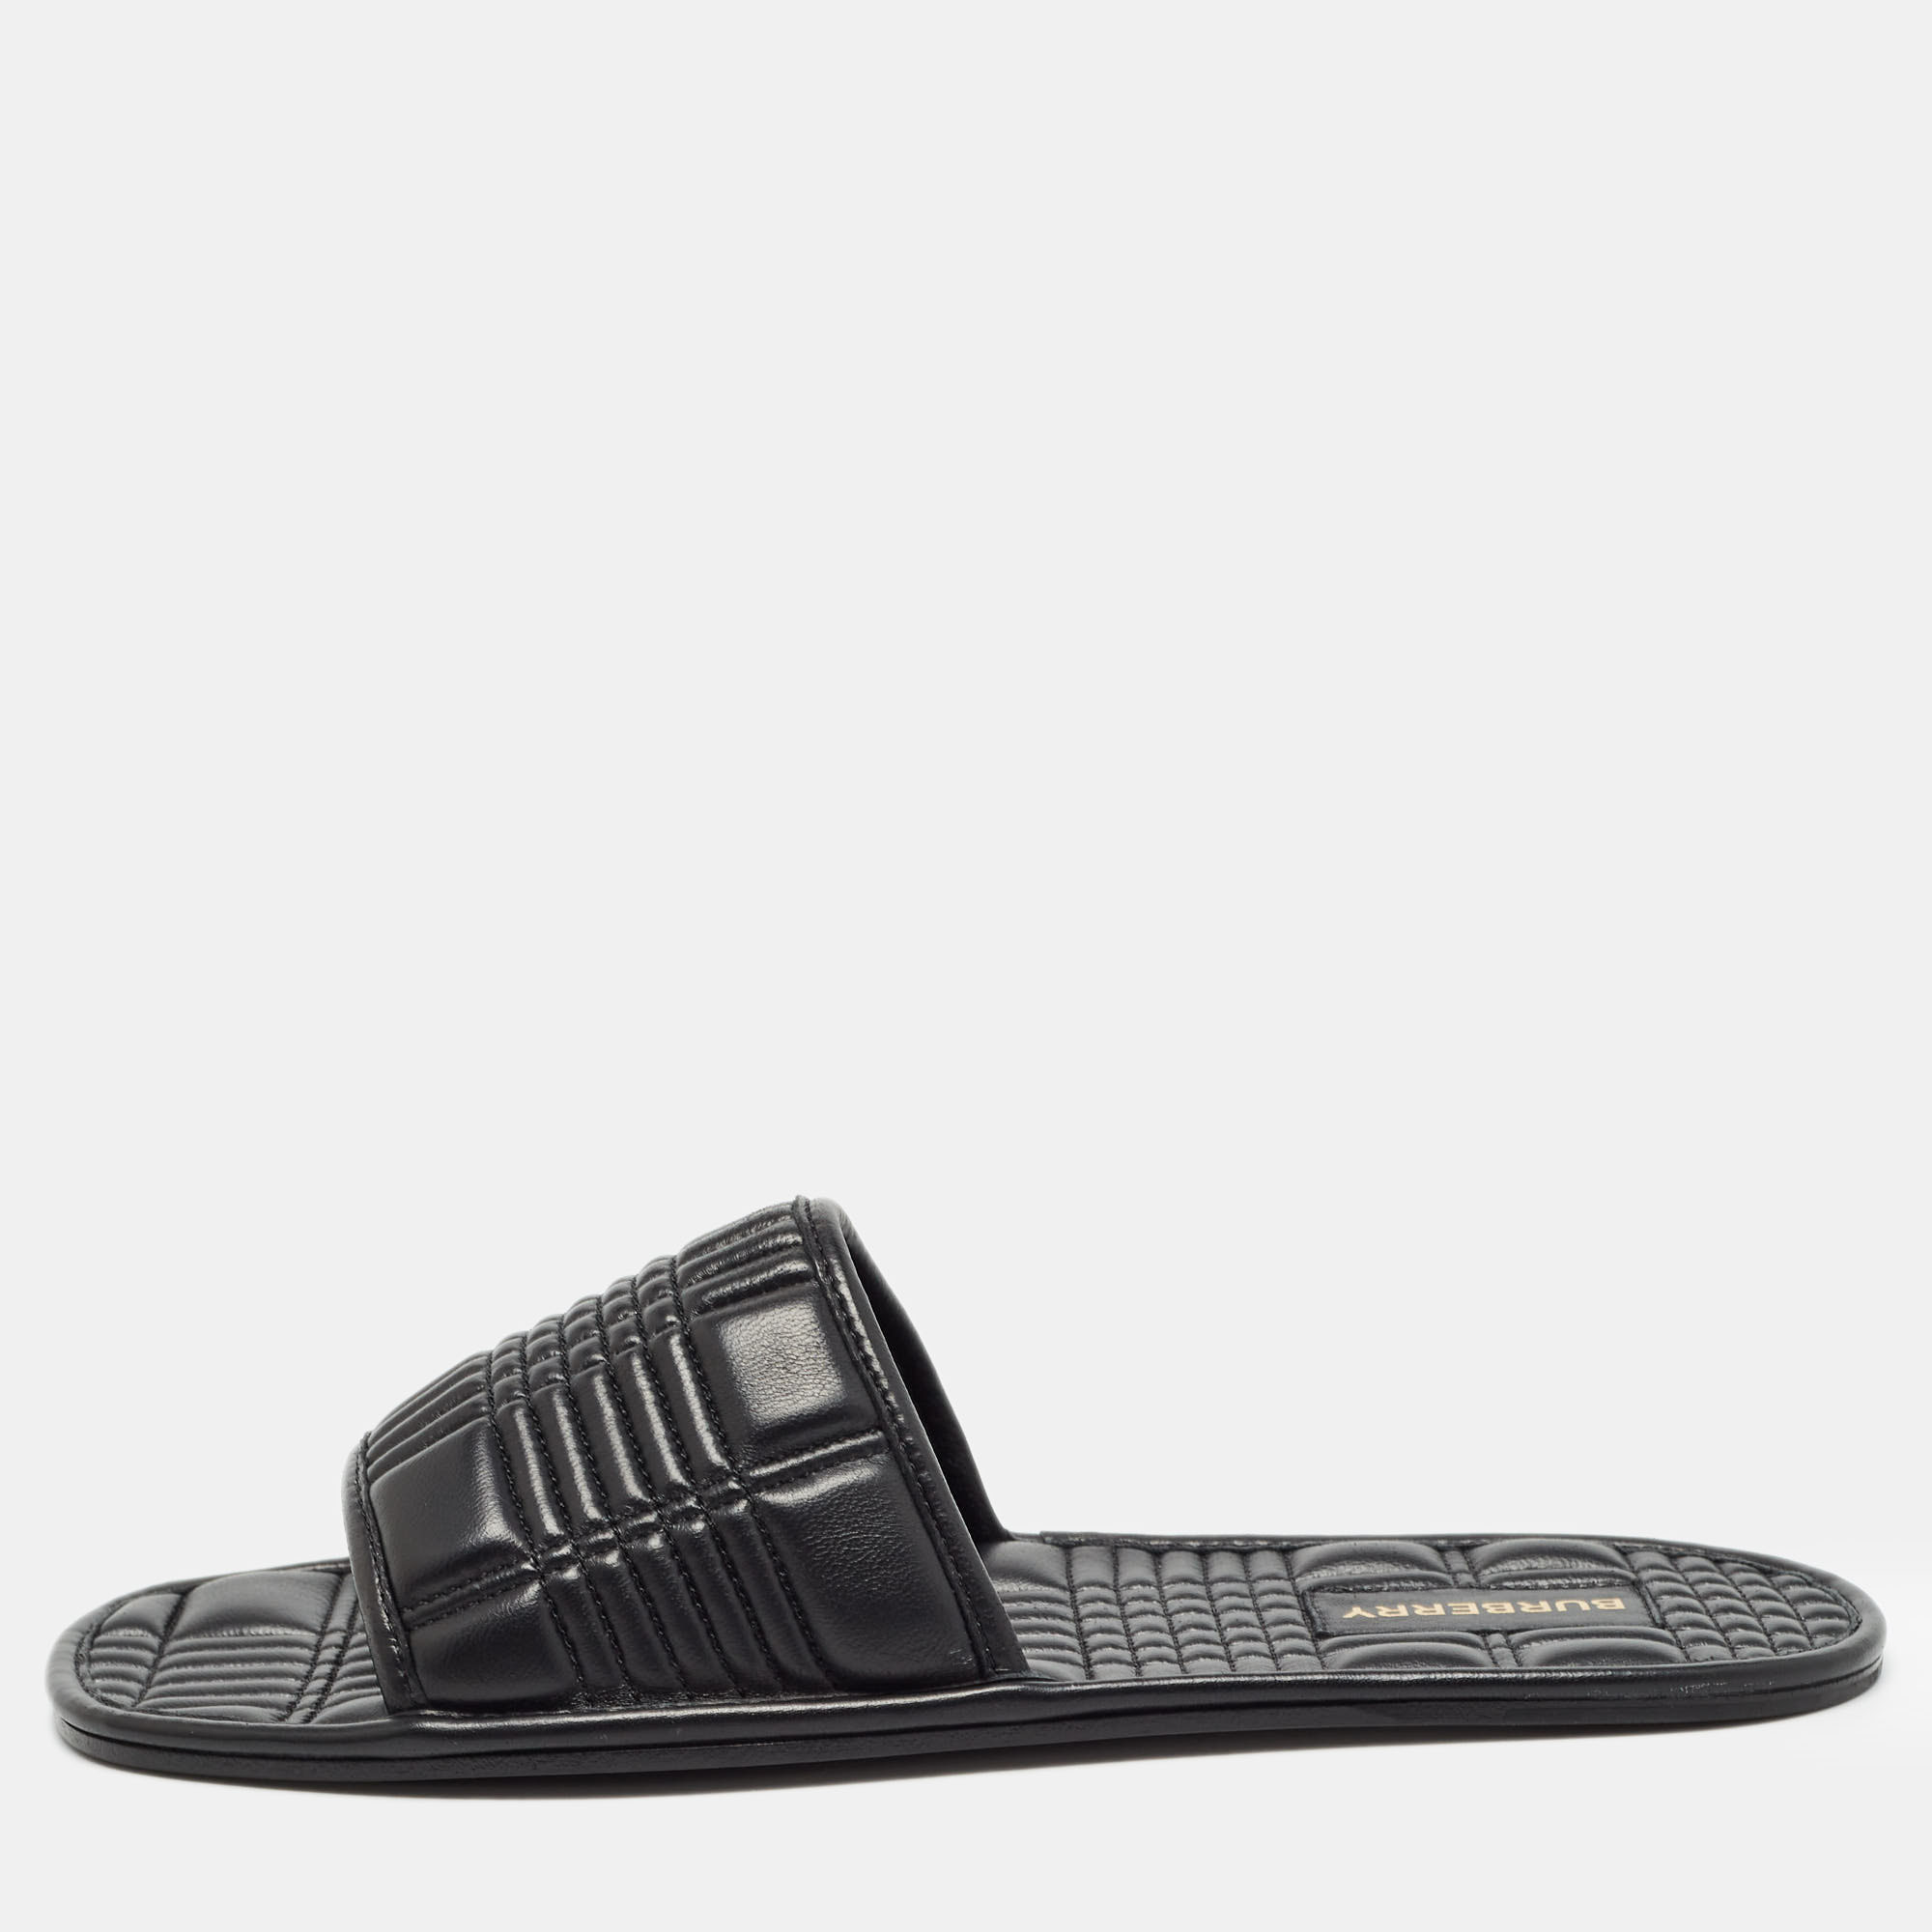 Pre-owned Burberry Black Quilted Leather Alixa Flat Slides Size 38